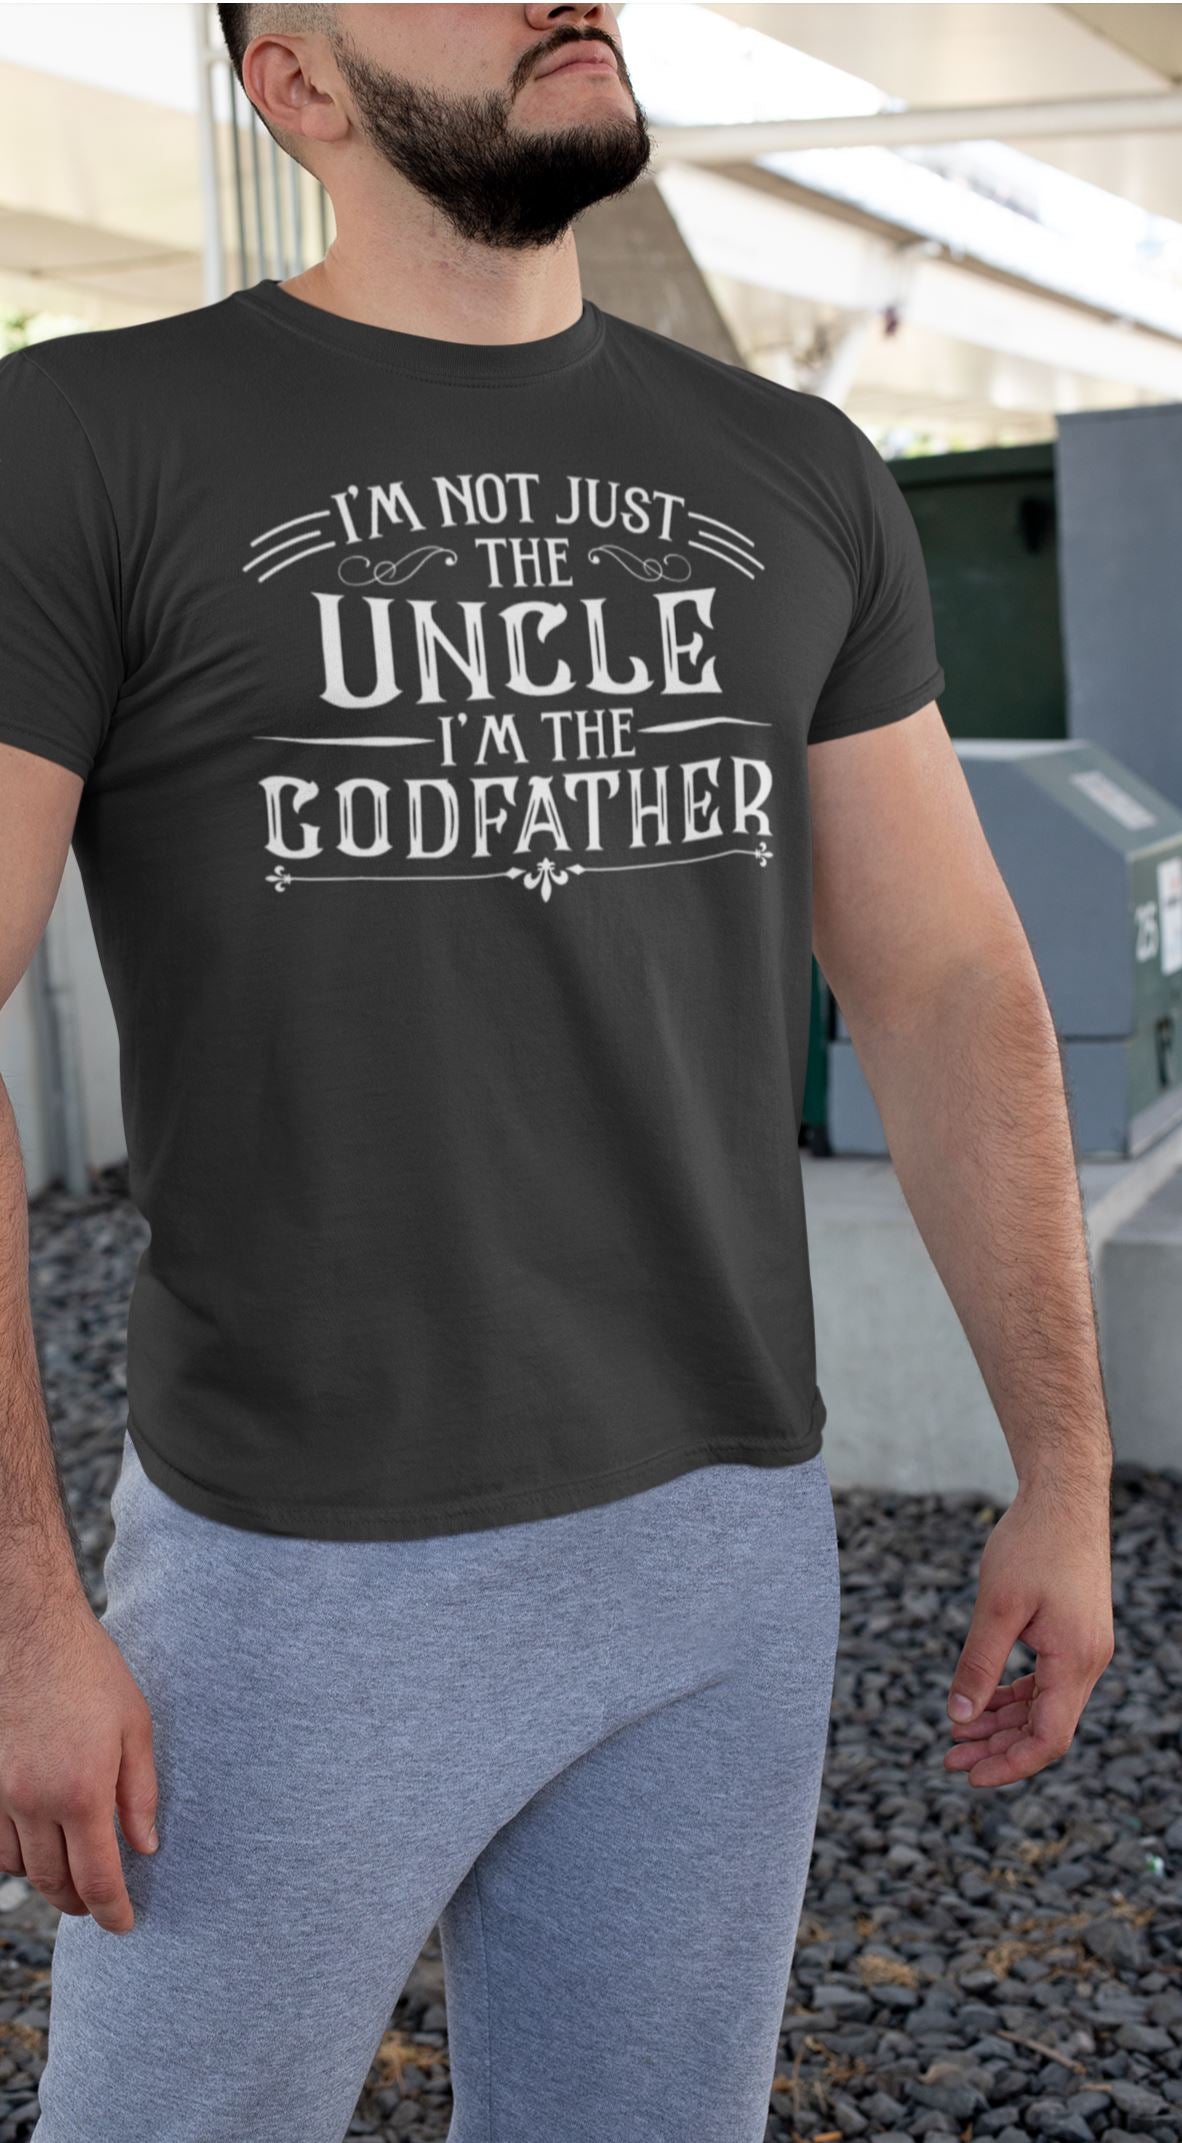 I am not just the Uncle I'm the Godfather Exclusive Black T-Shirt for Men freeshipping - Catch My Drift India